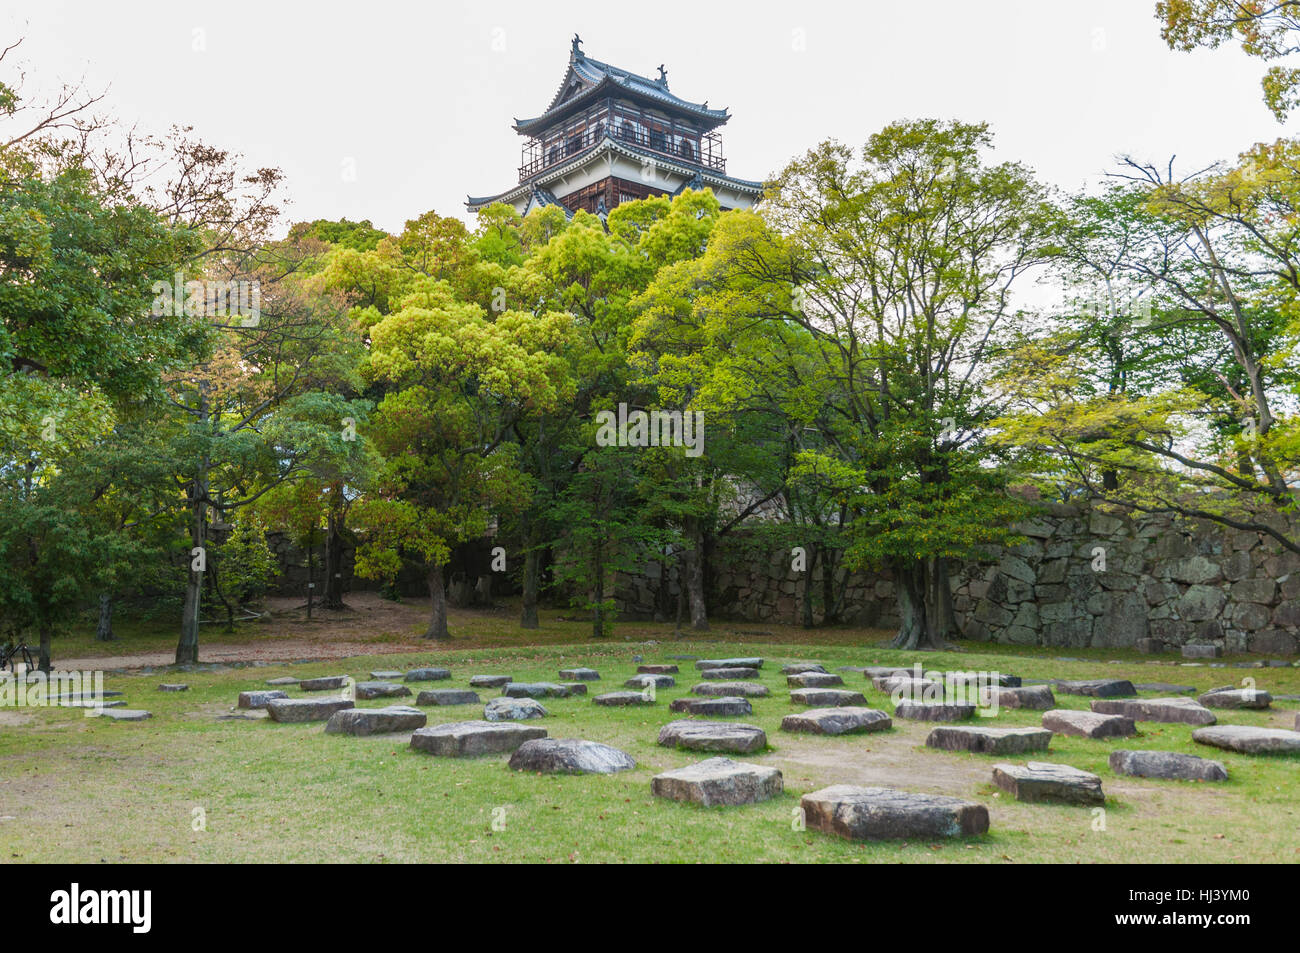 Hiroshima, Japan - August 28 2013: Sometimes called Carp Castle, Hiroshima Castle was built in the lat 16th century for the Daimyo. It was destroyed i Stock Photo